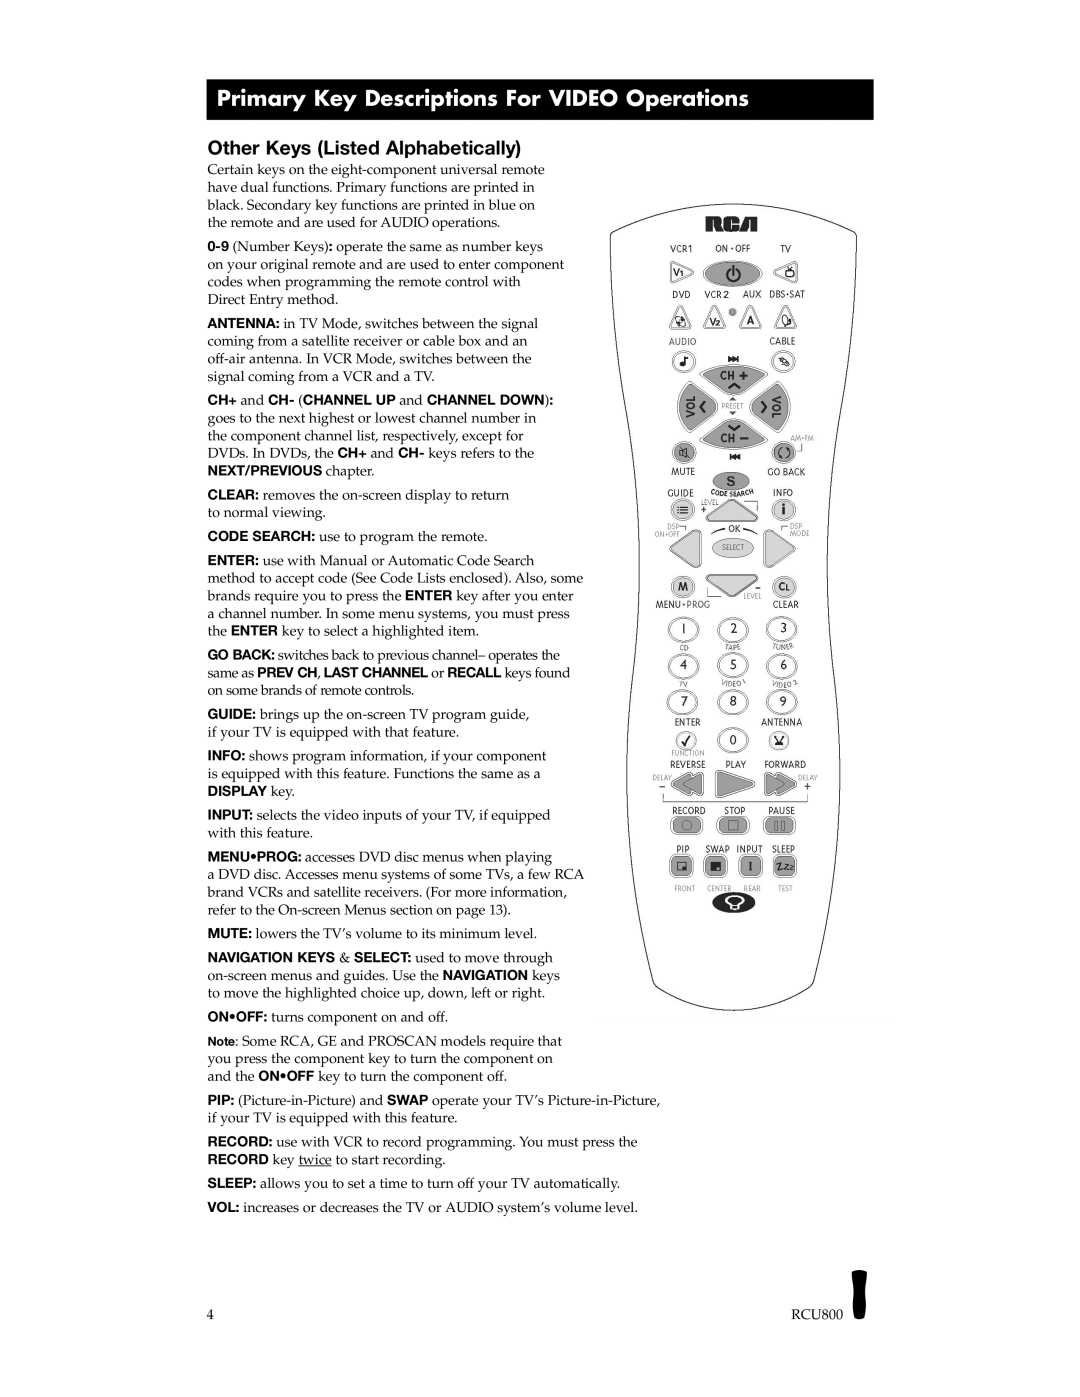 RCA RCU800B manual Primary Key Descriptions For Video Operations, Other Keys Listed Alphabetically 